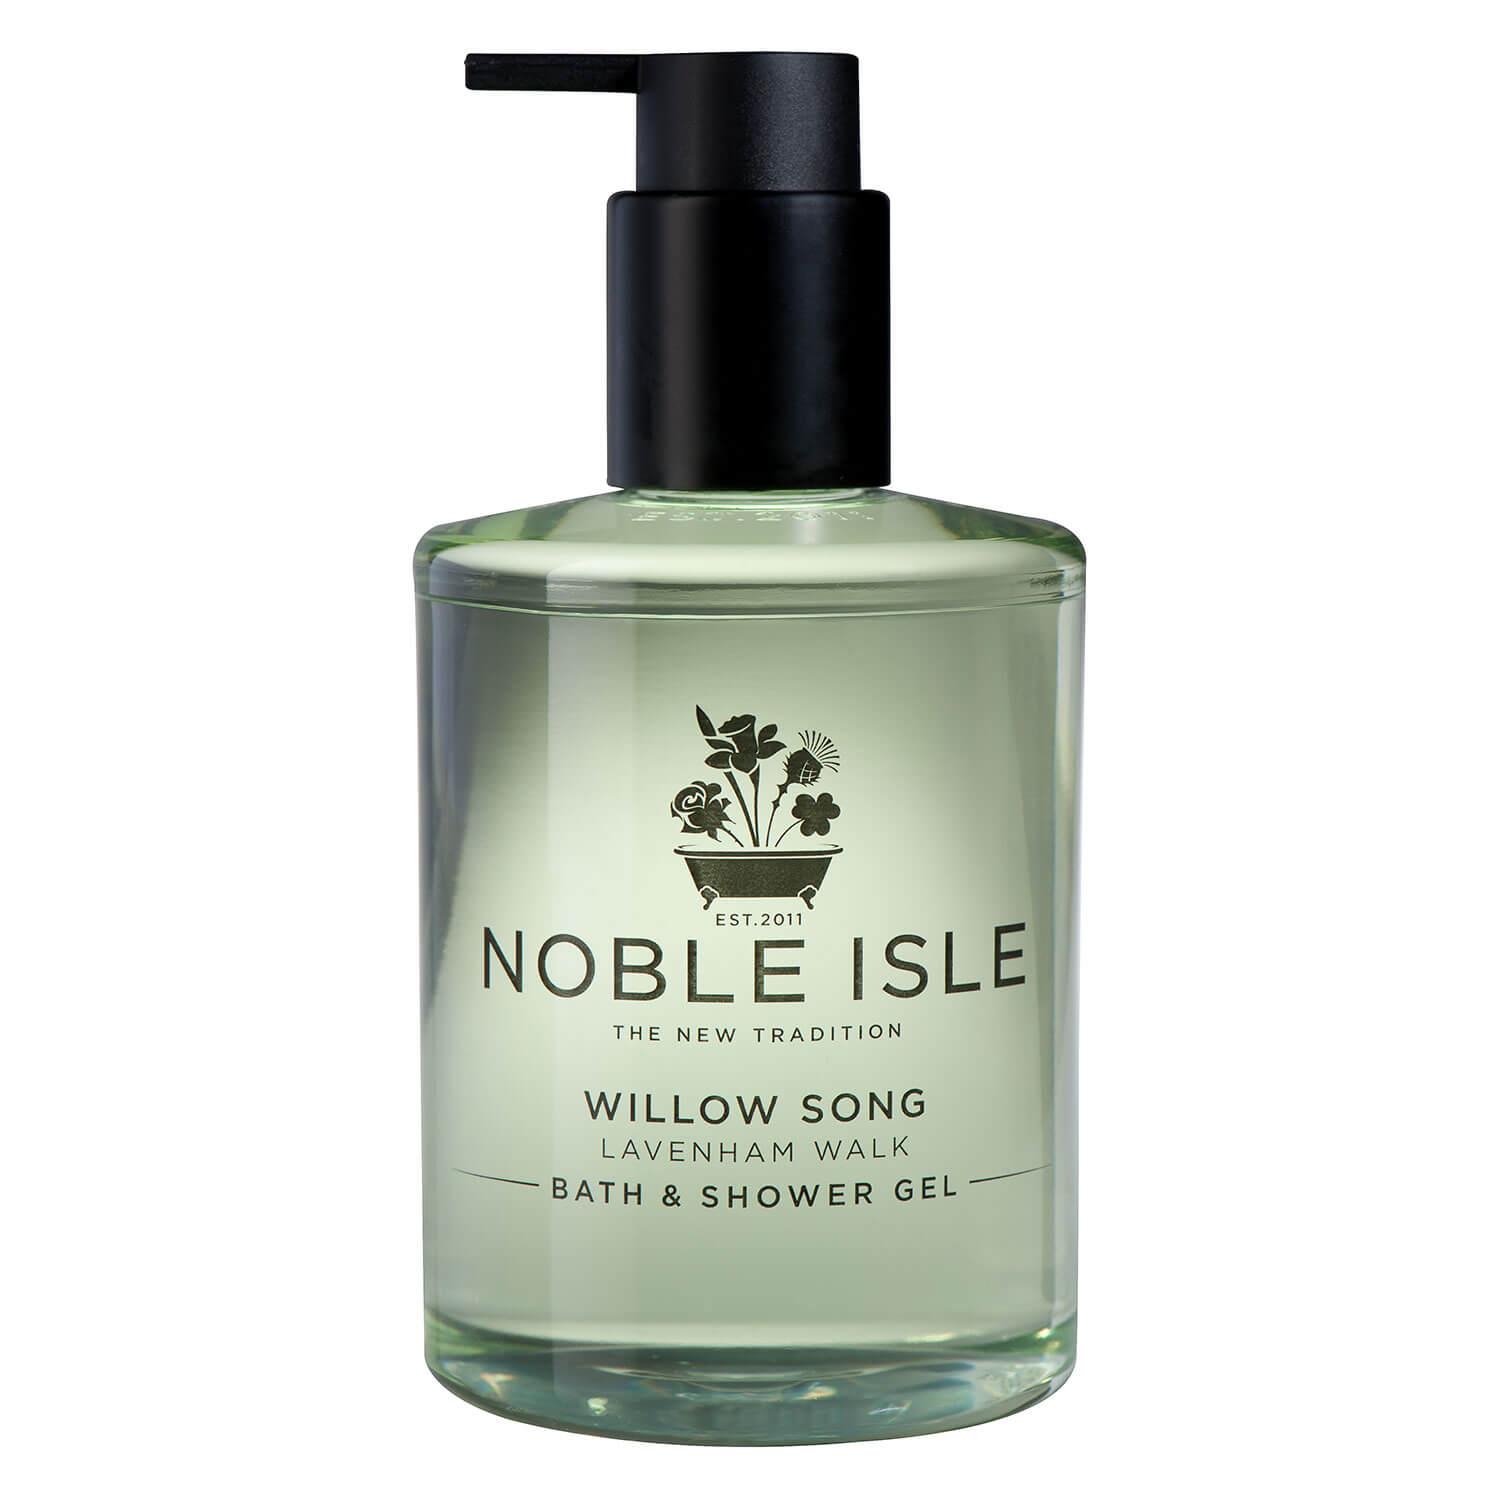 Noble Isle - Willow Song Bath & Shower Gel